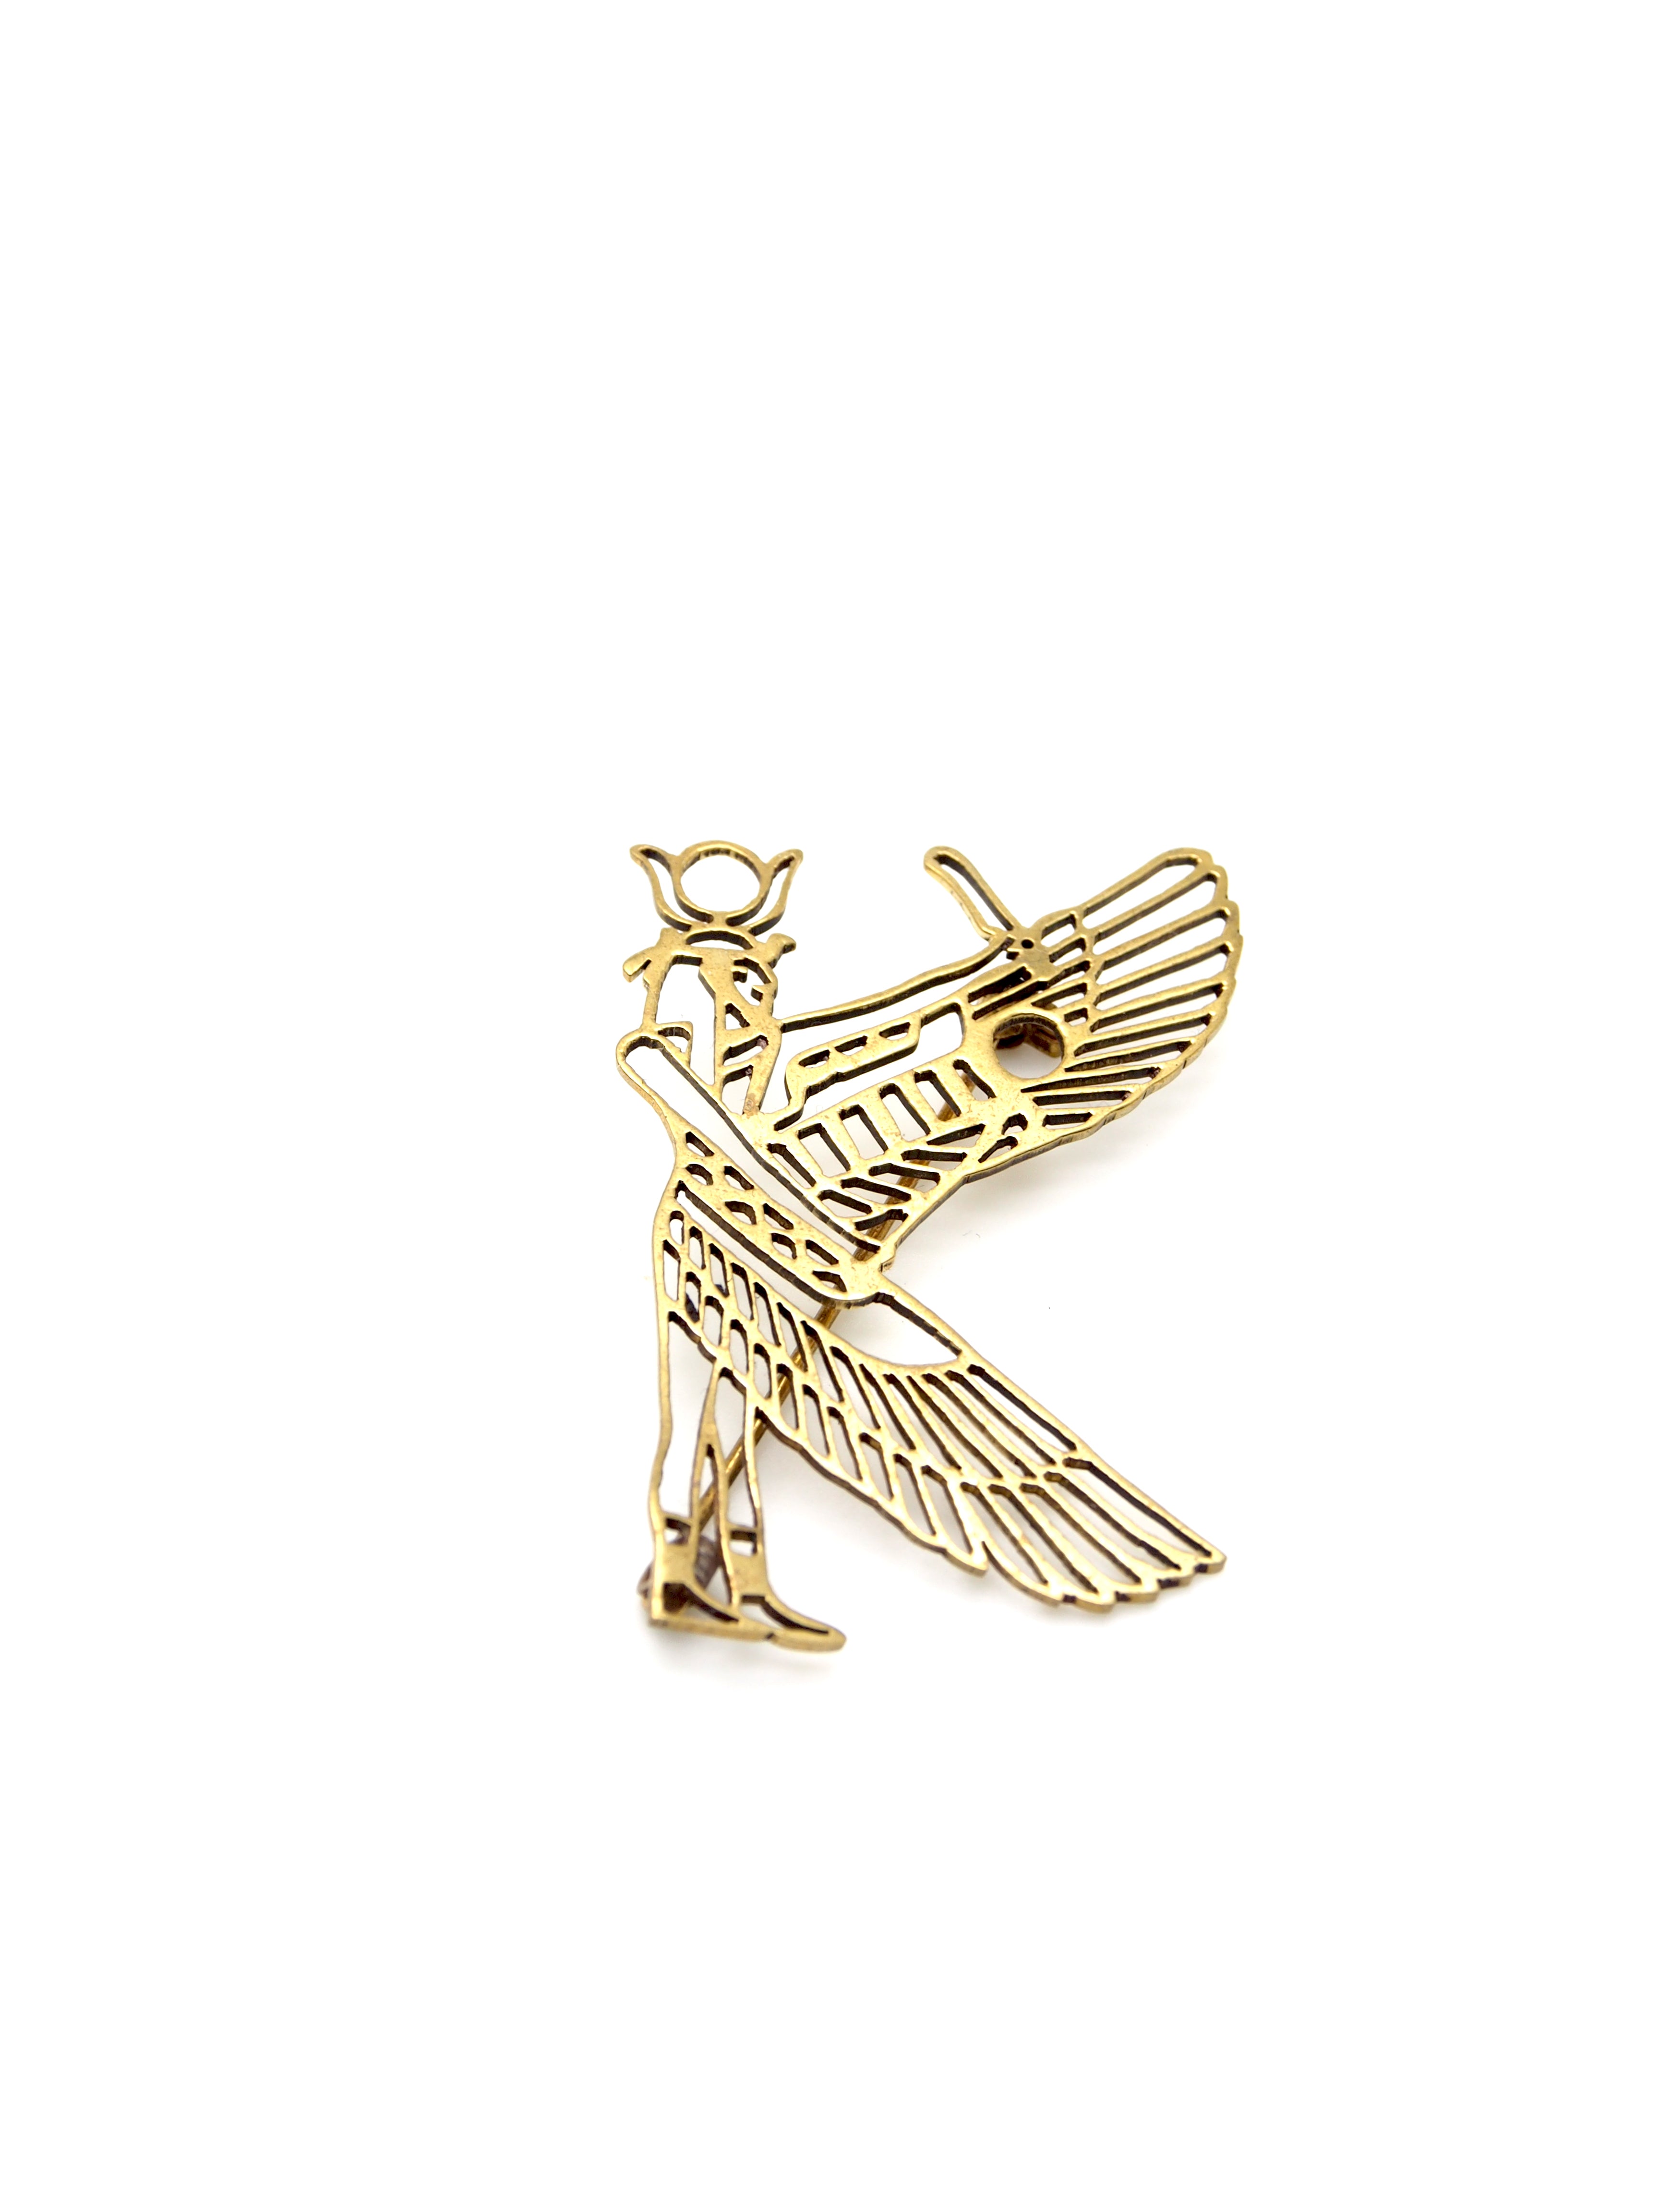 Hansel & Smith - Ancient Egypt Isis Brooch